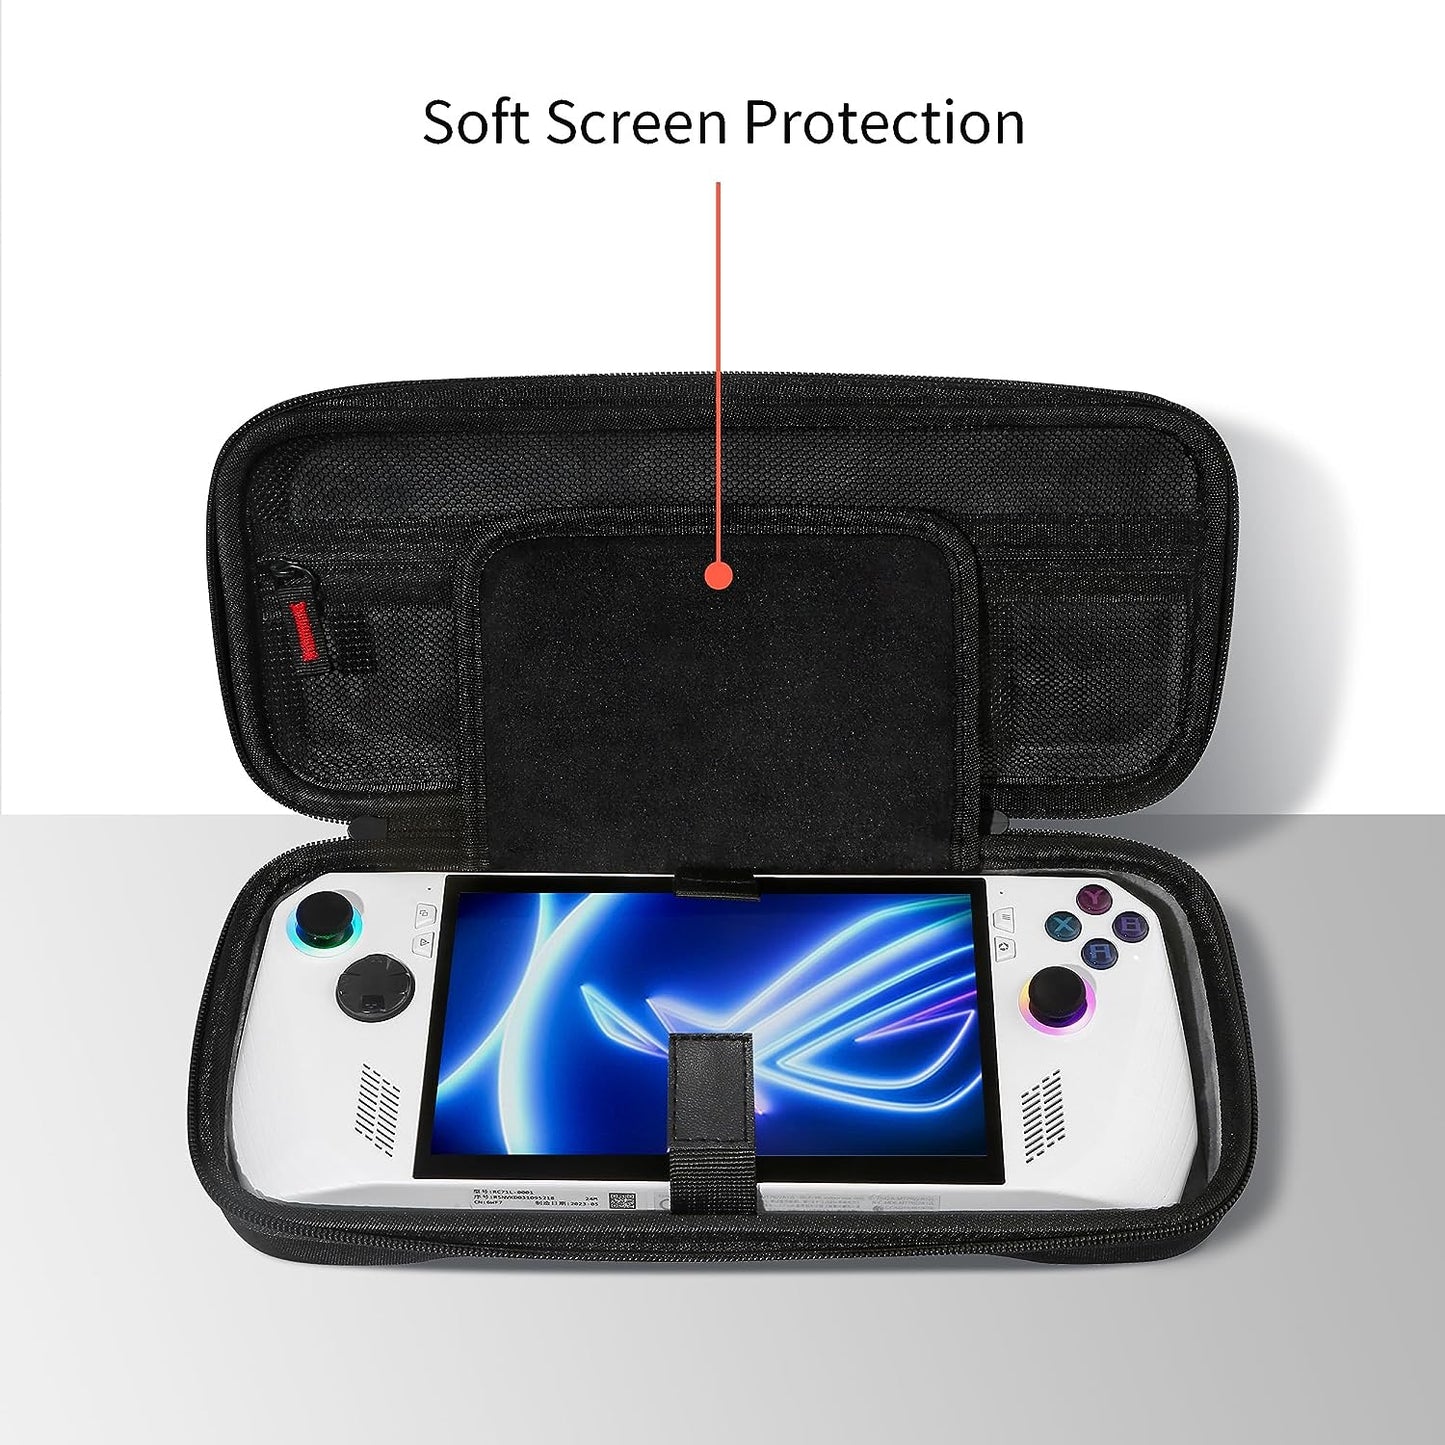 Carrying Case for ROG Ally - Portable Hard Shell Carrying Case for ROG Ally Gaming Handheld - Double Pocket/Button Protection/Large Capacity